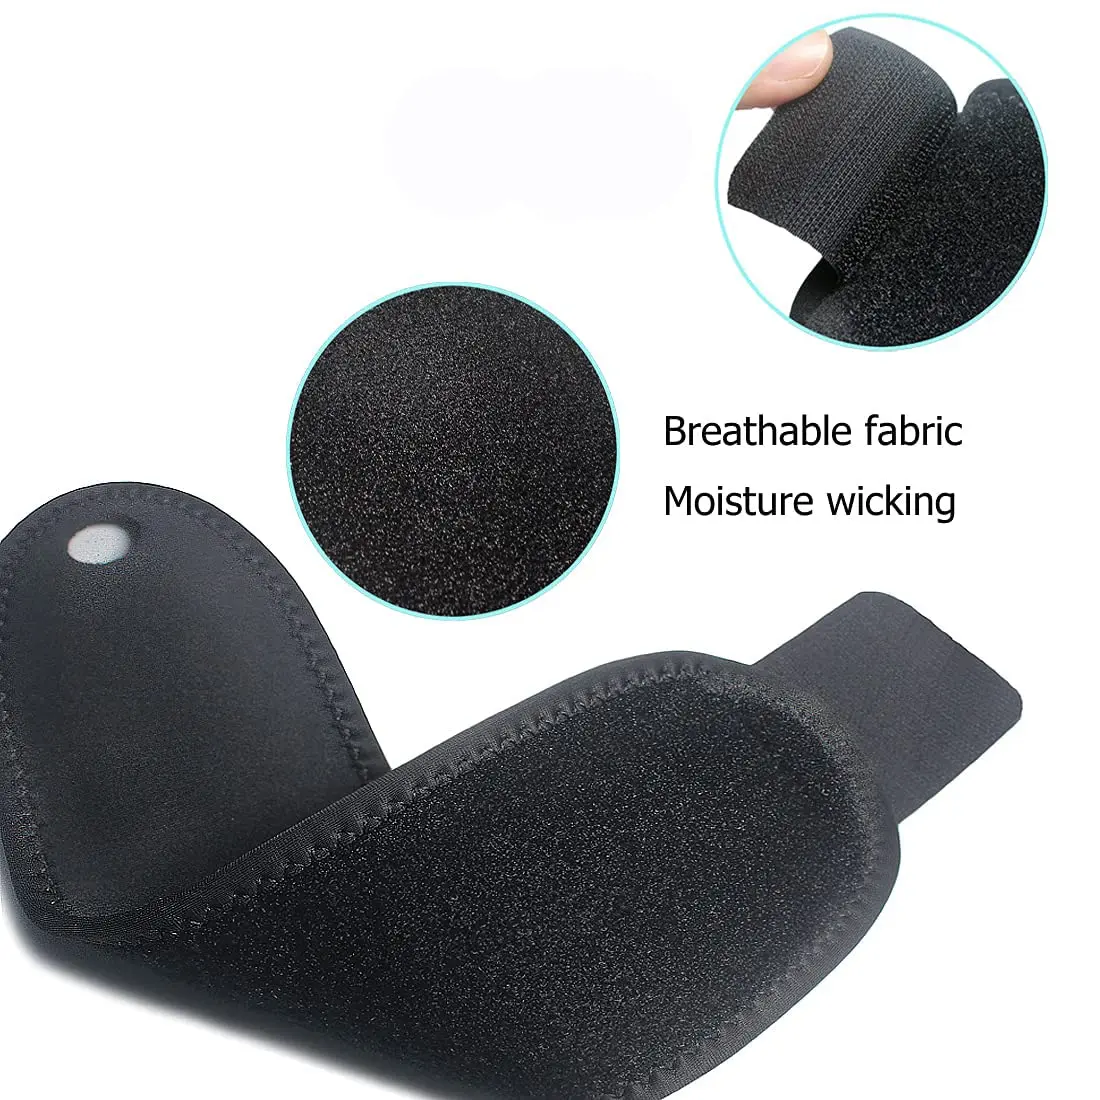 Adjustable Wrist Support With Thumb Hole For For Arthritis And ...